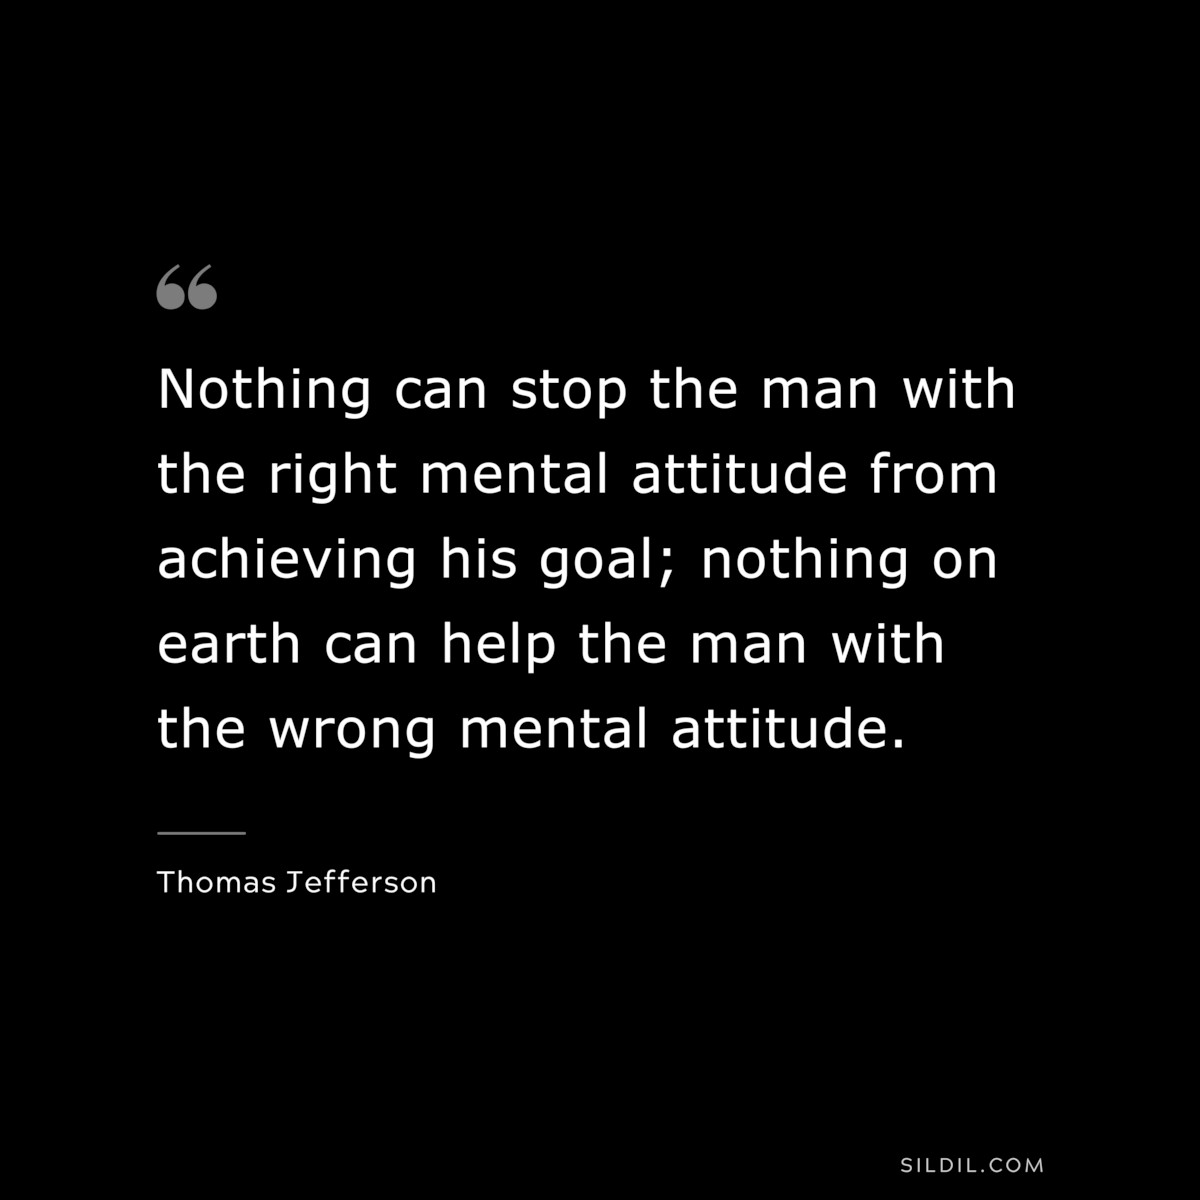 Nothing can stop the man with the right mental attitude from achieving his goal; nothing on earth can help the man with the wrong mental attitude. ― Thomas Jefferson